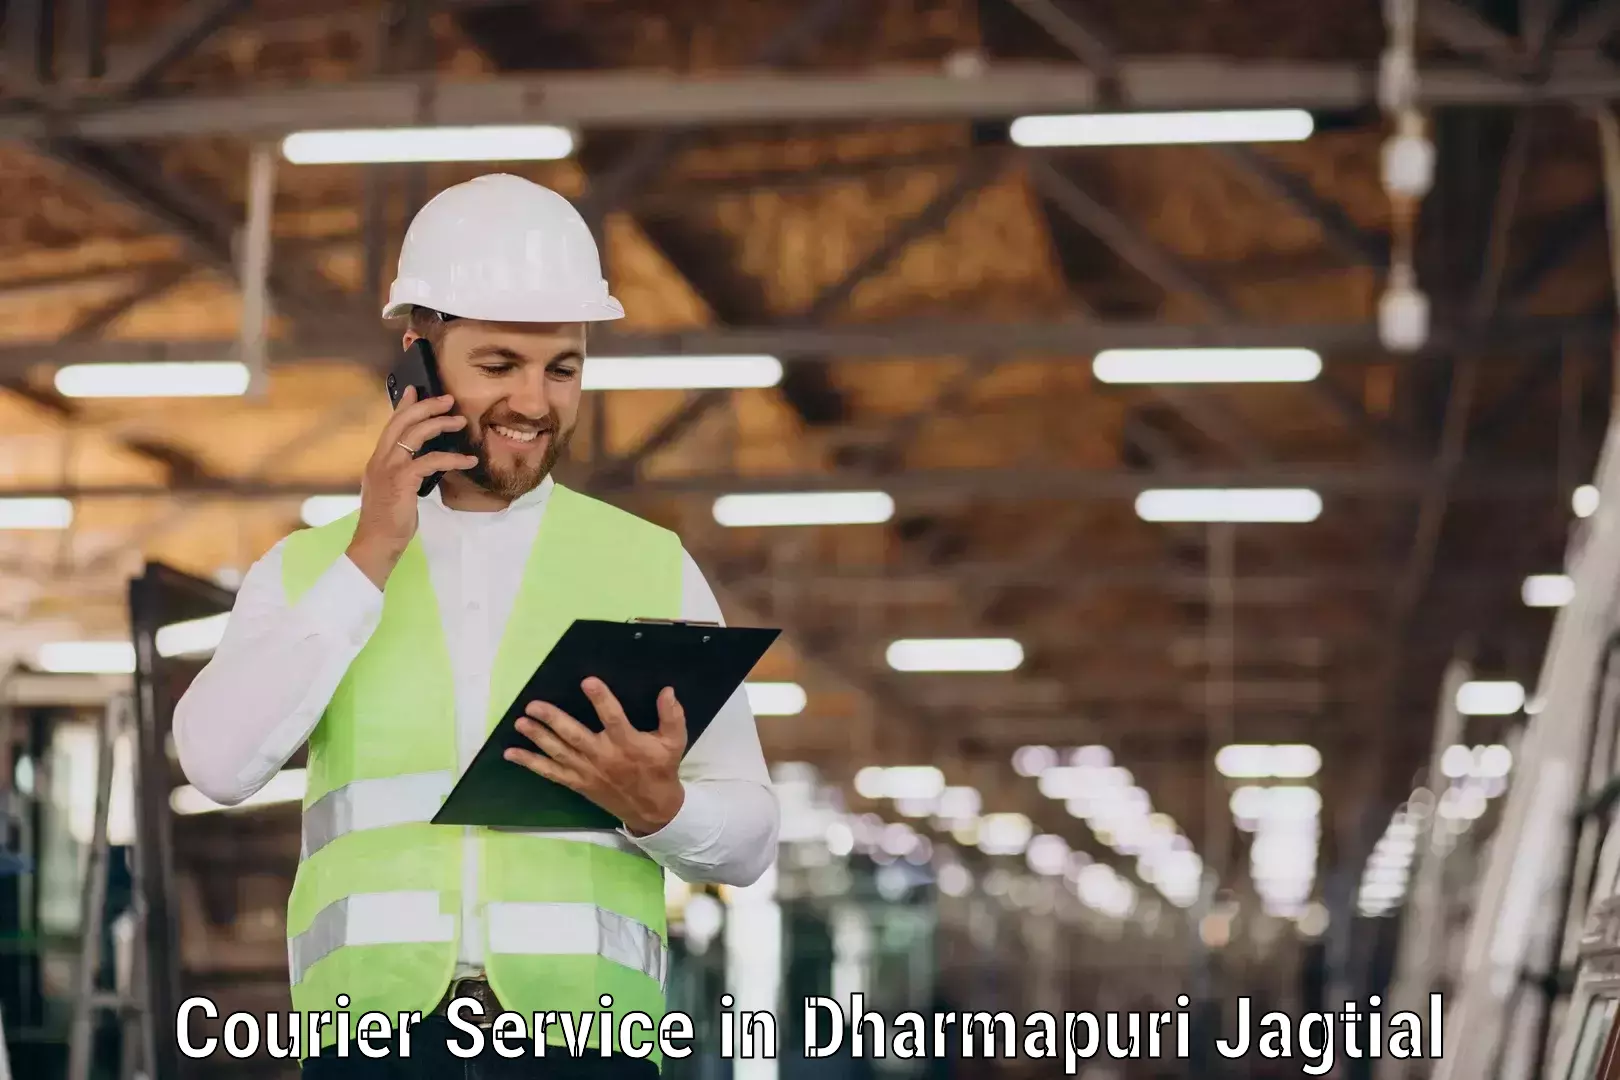 High-quality delivery services in Dharmapuri Jagtial